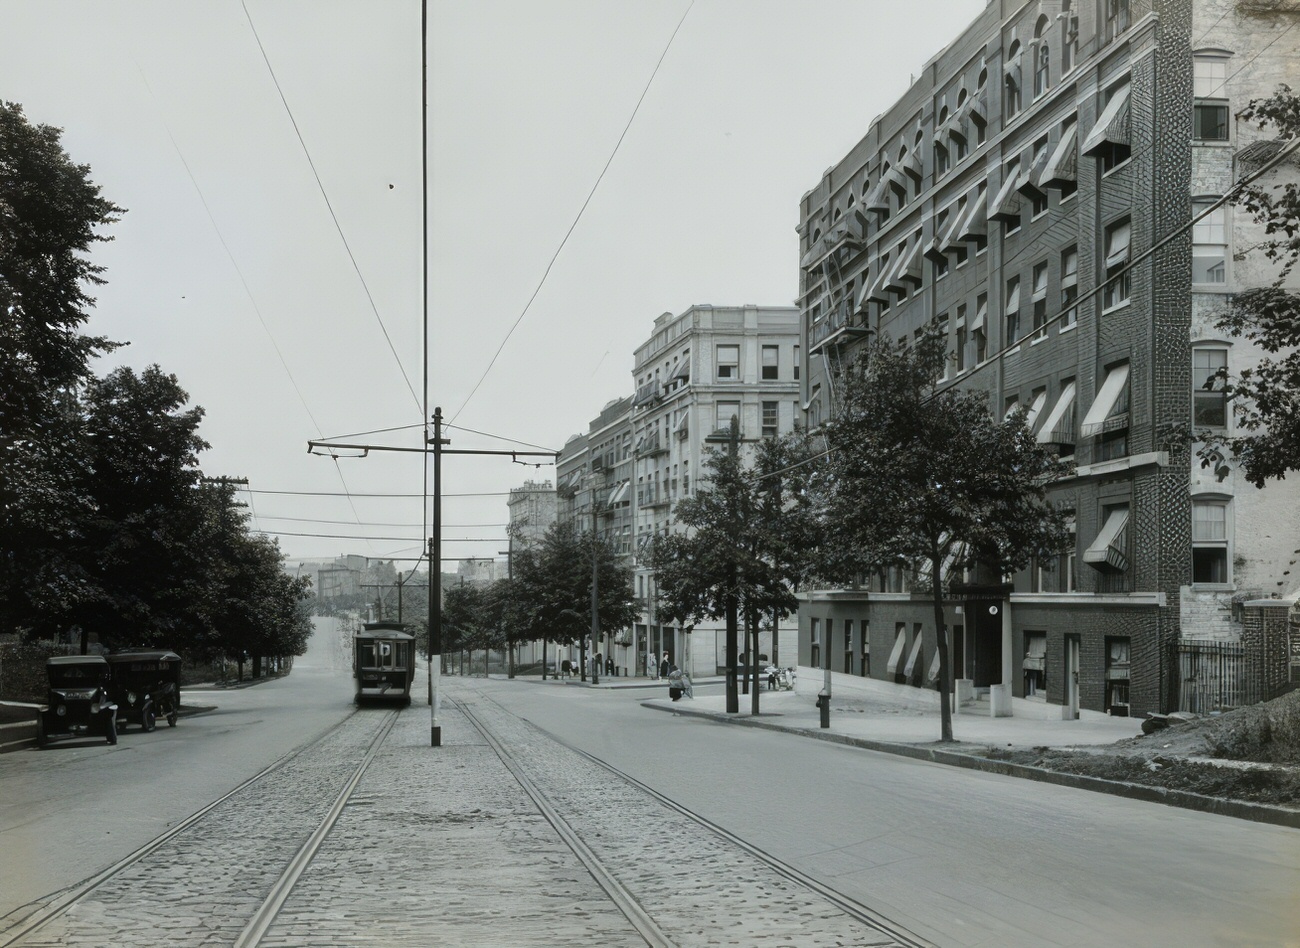 A Streetcar And Apartment Buildings, Likely In The Bronx, Circa 1915.